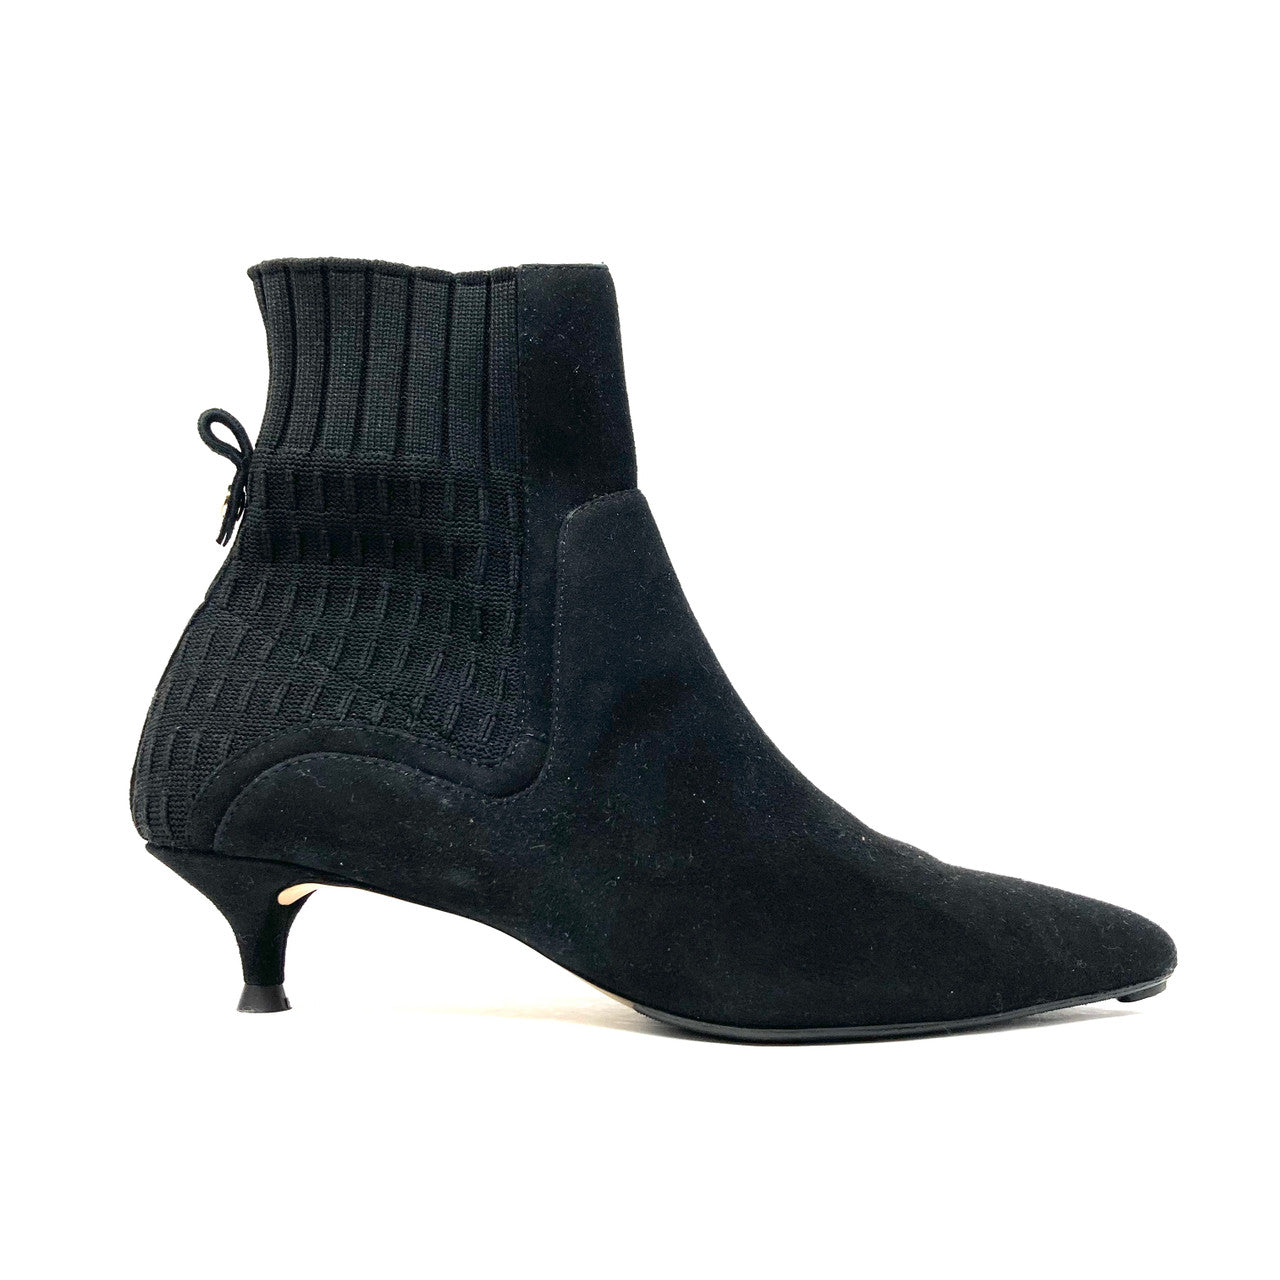 Massimo Dutti Knit Suede Booties - Thumbnail